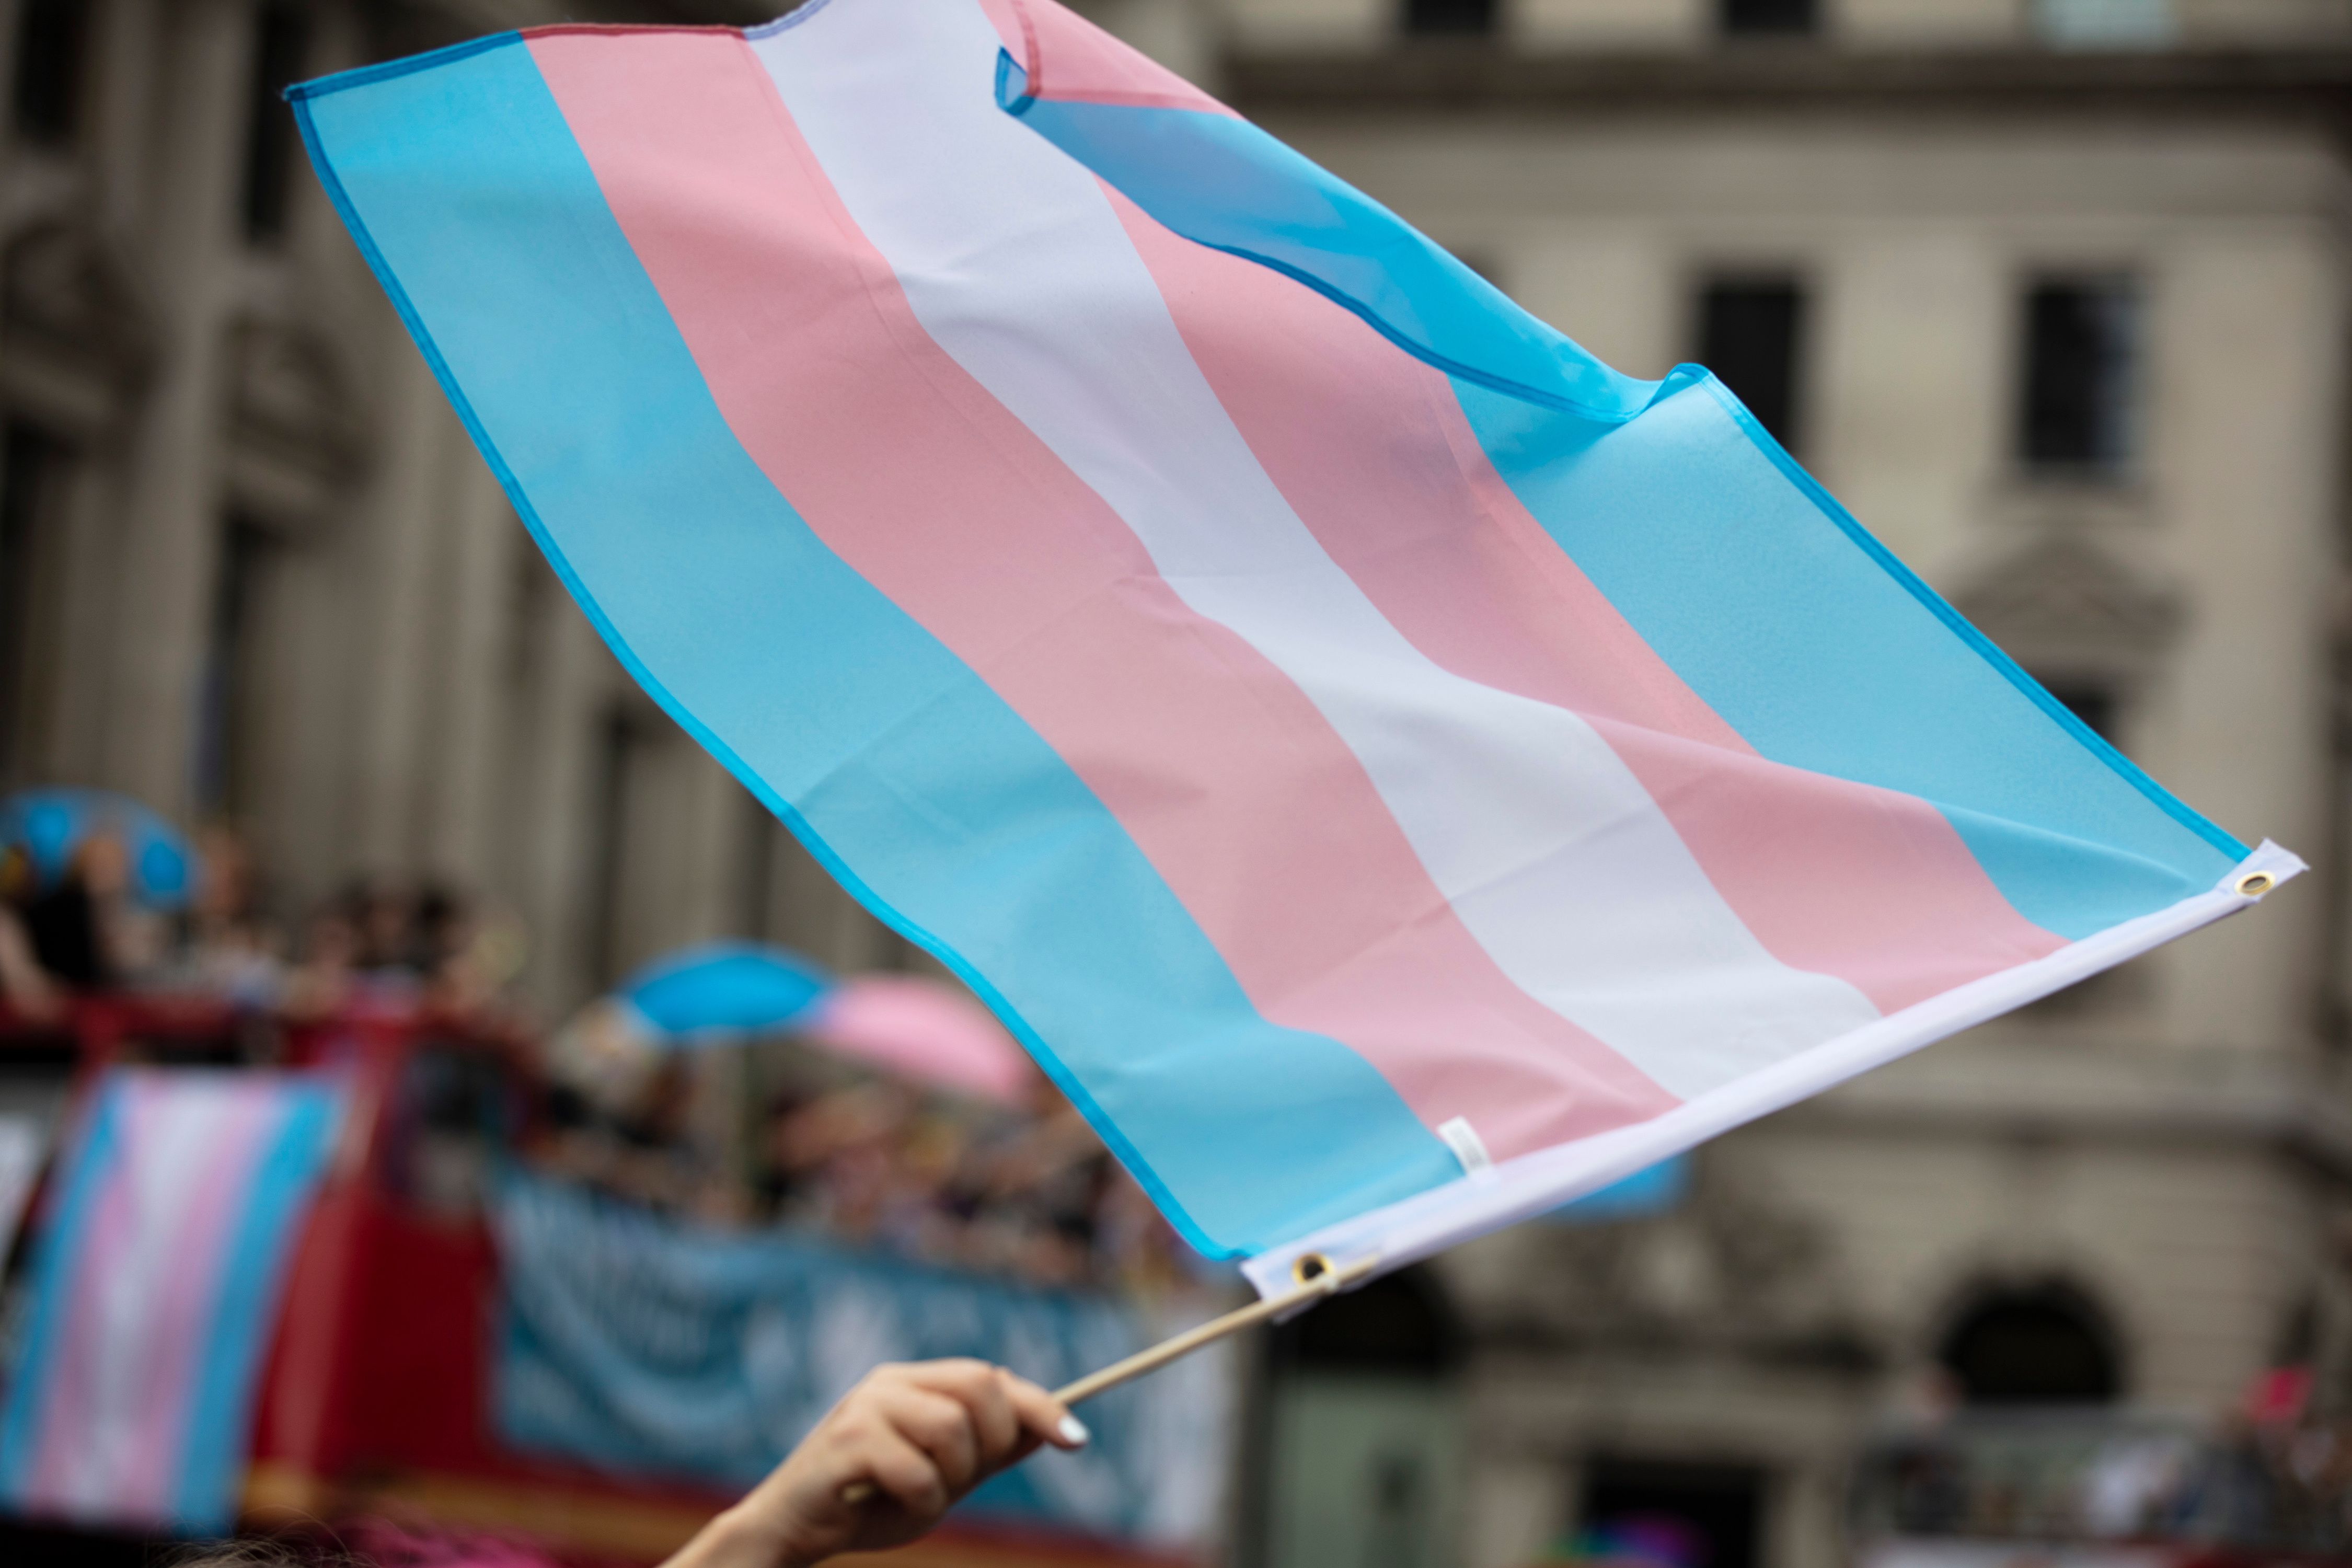 Cambridge Dictionary adds new definitions for 'man' and 'woman' to include  trans people